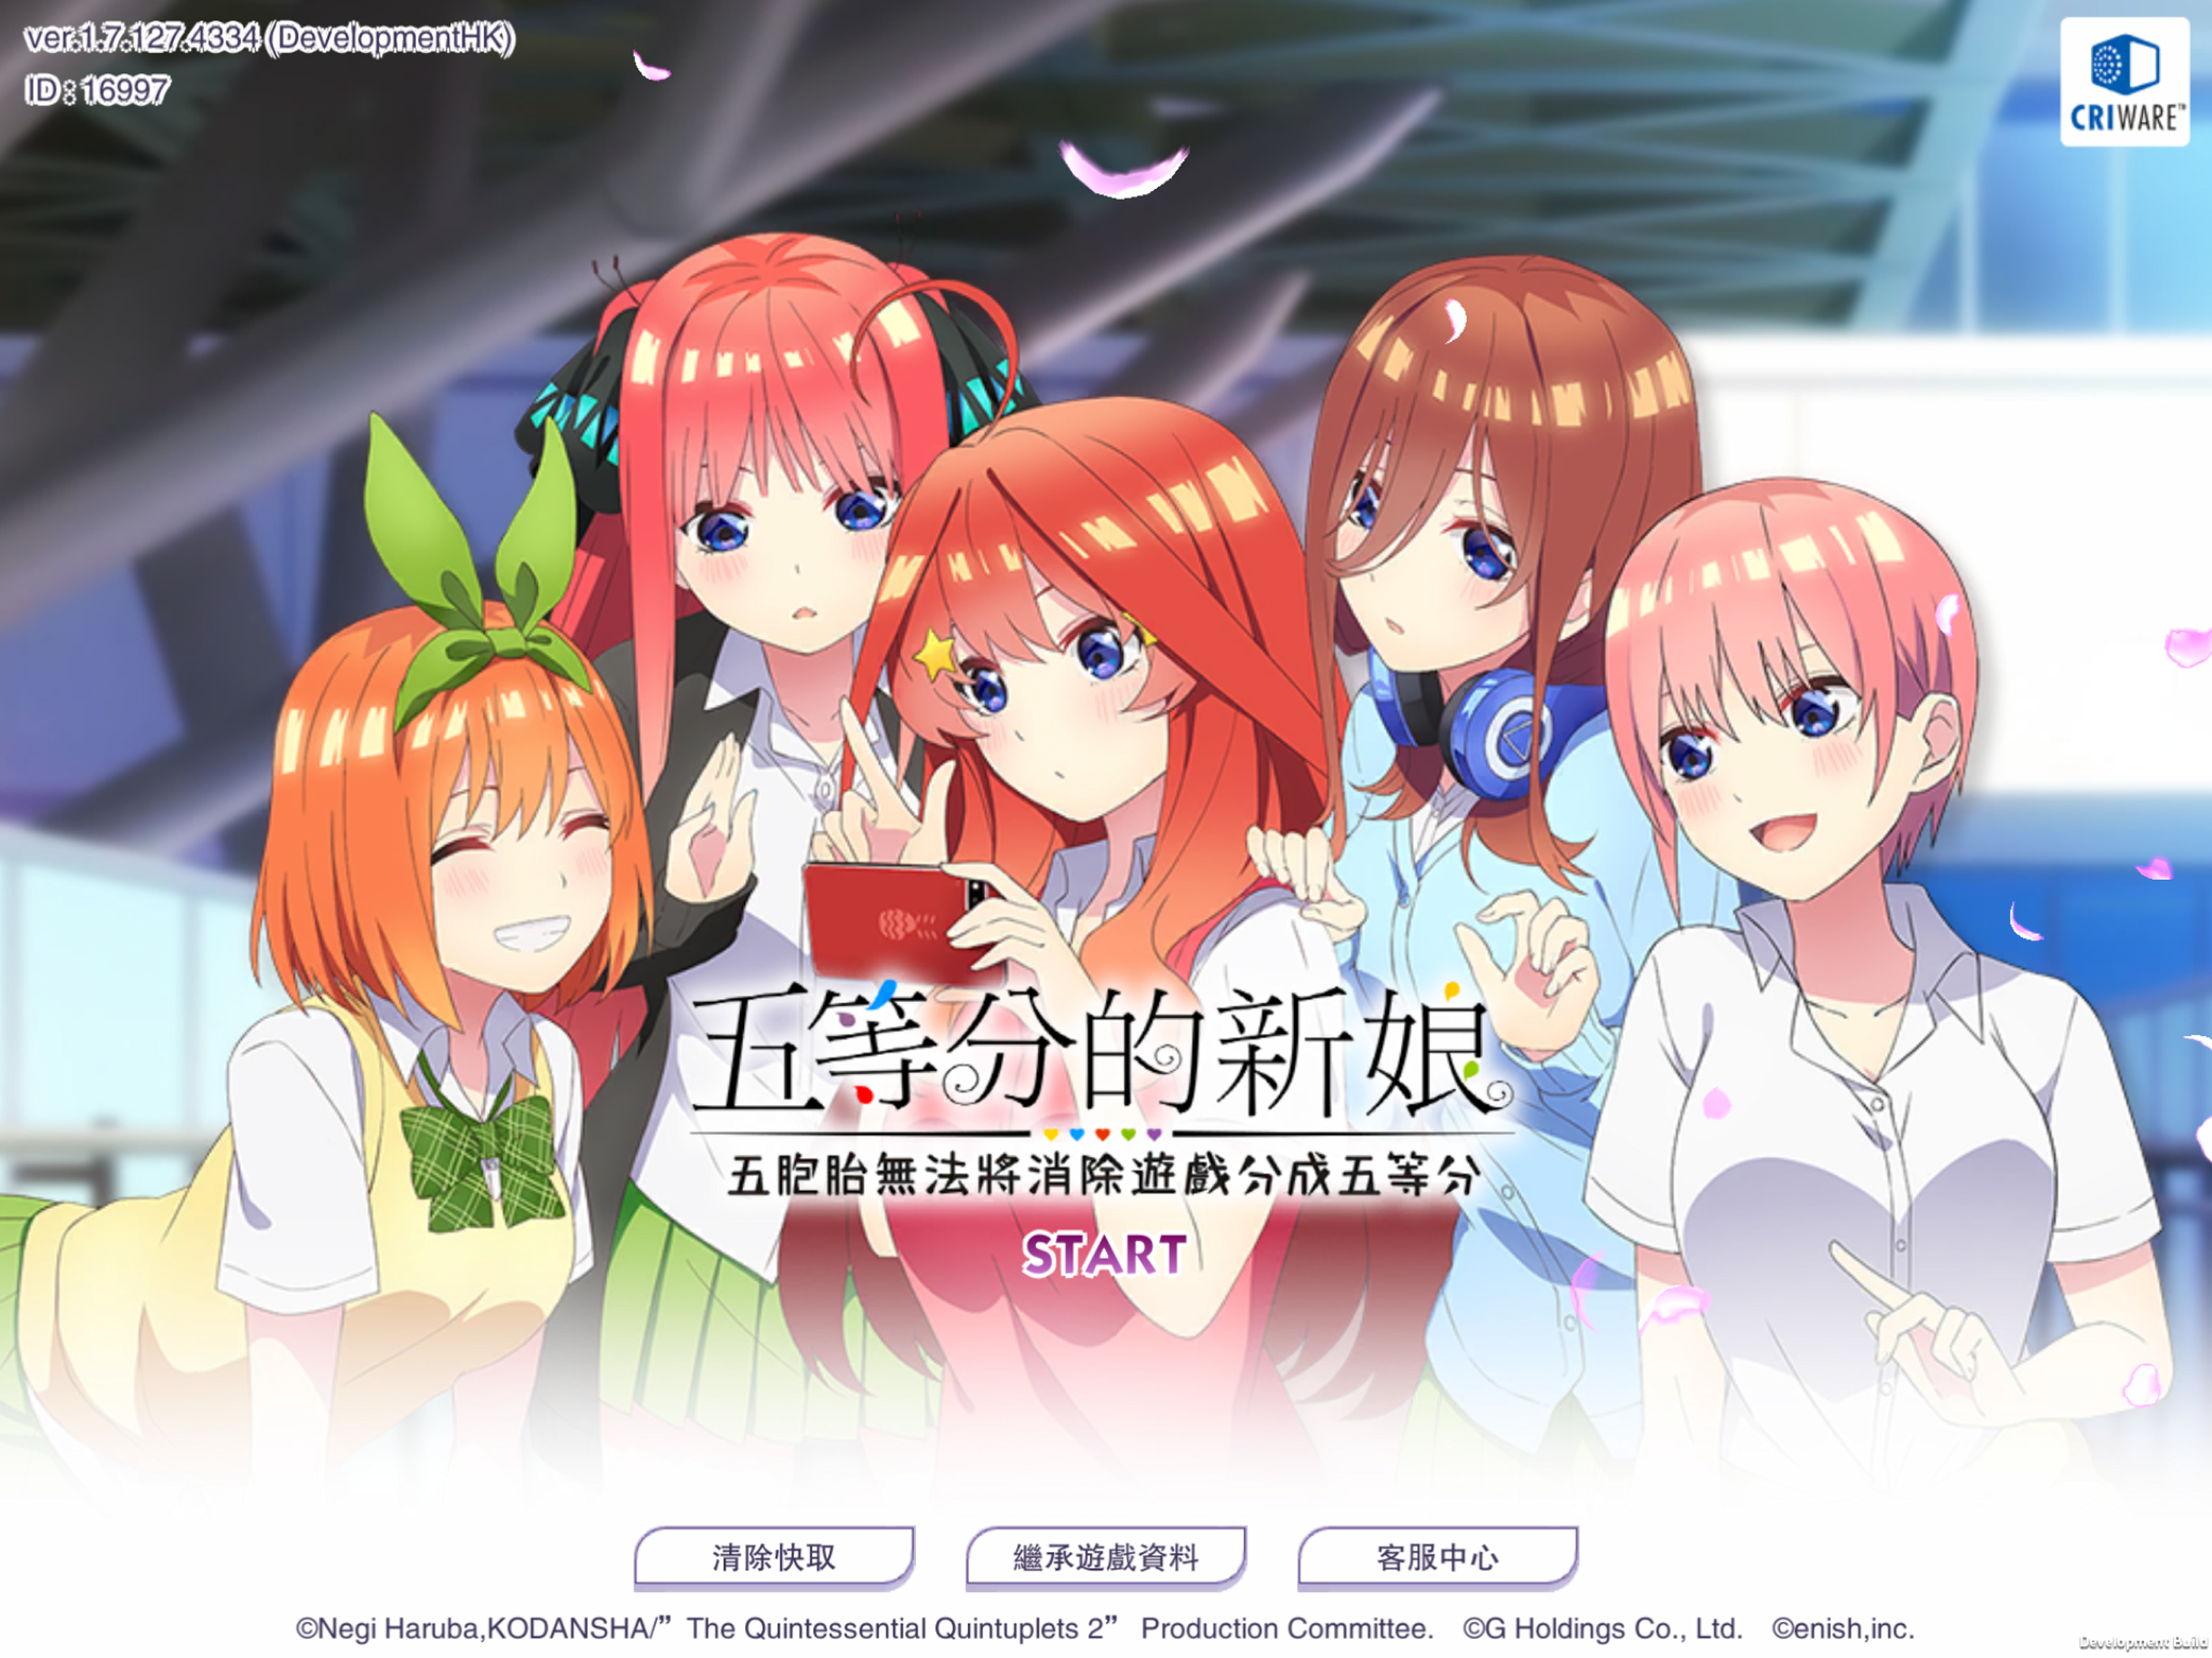 anime production - 2 versions of The Quintessential Quintuplets